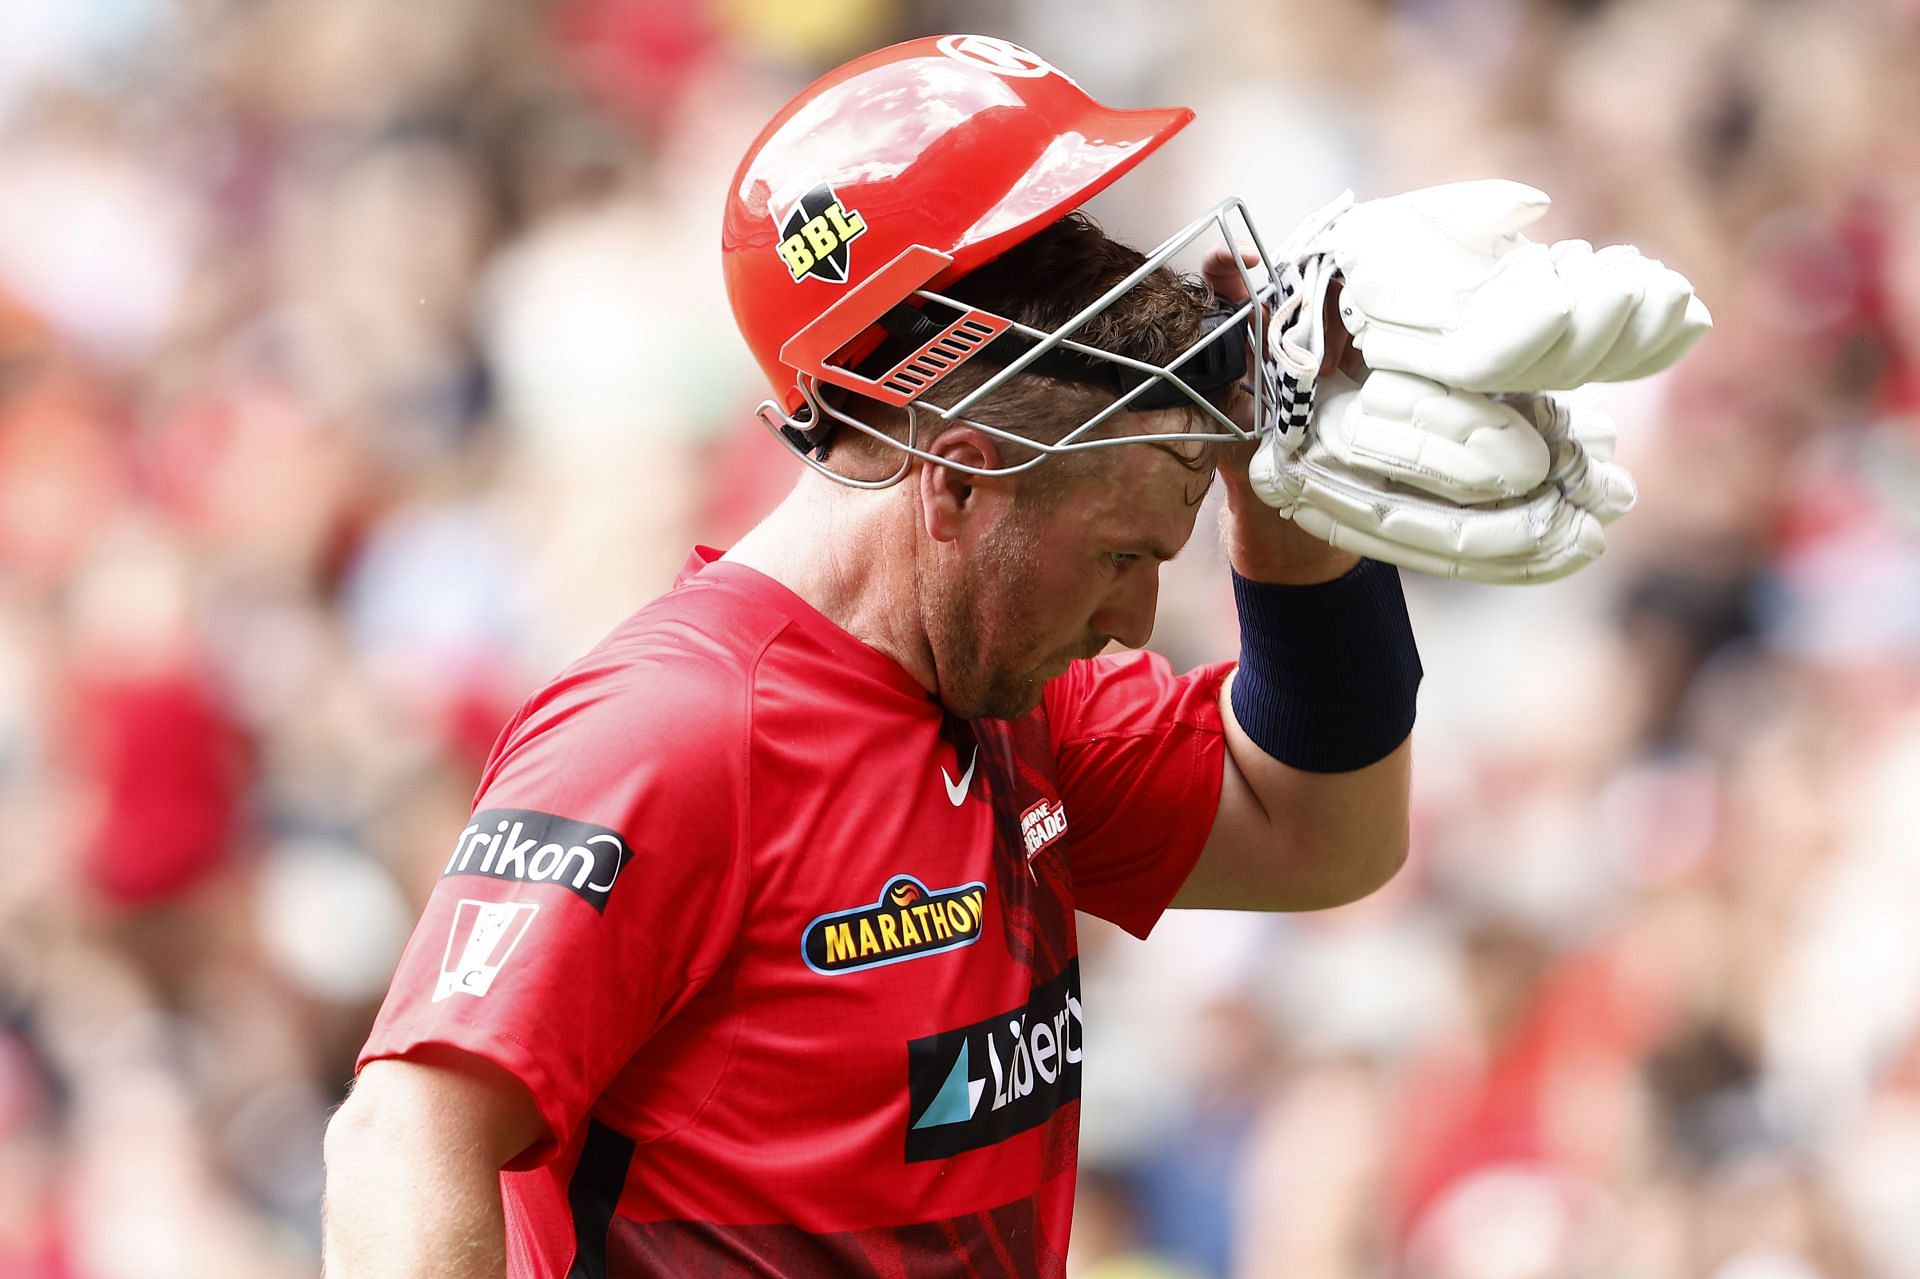 Aaron Finch in action for the Melbourne Renegades. (Credits: Getty)